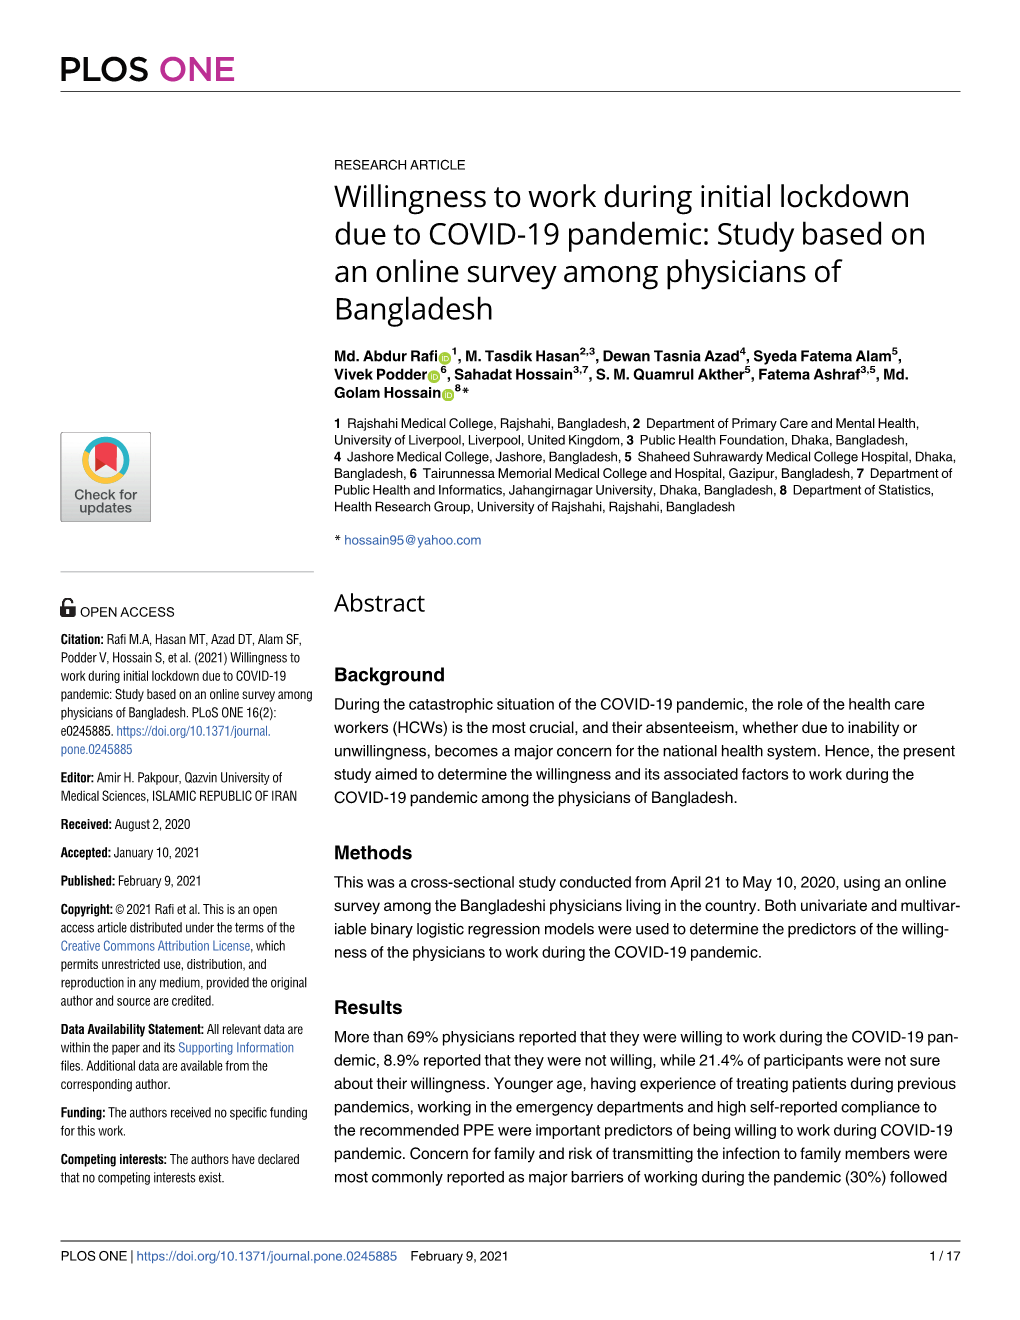 Willingness to Work During Initial Lockdown Due to COVID-19 Pandemic: Study Based on an Online Survey Among Physicians of Bangladesh